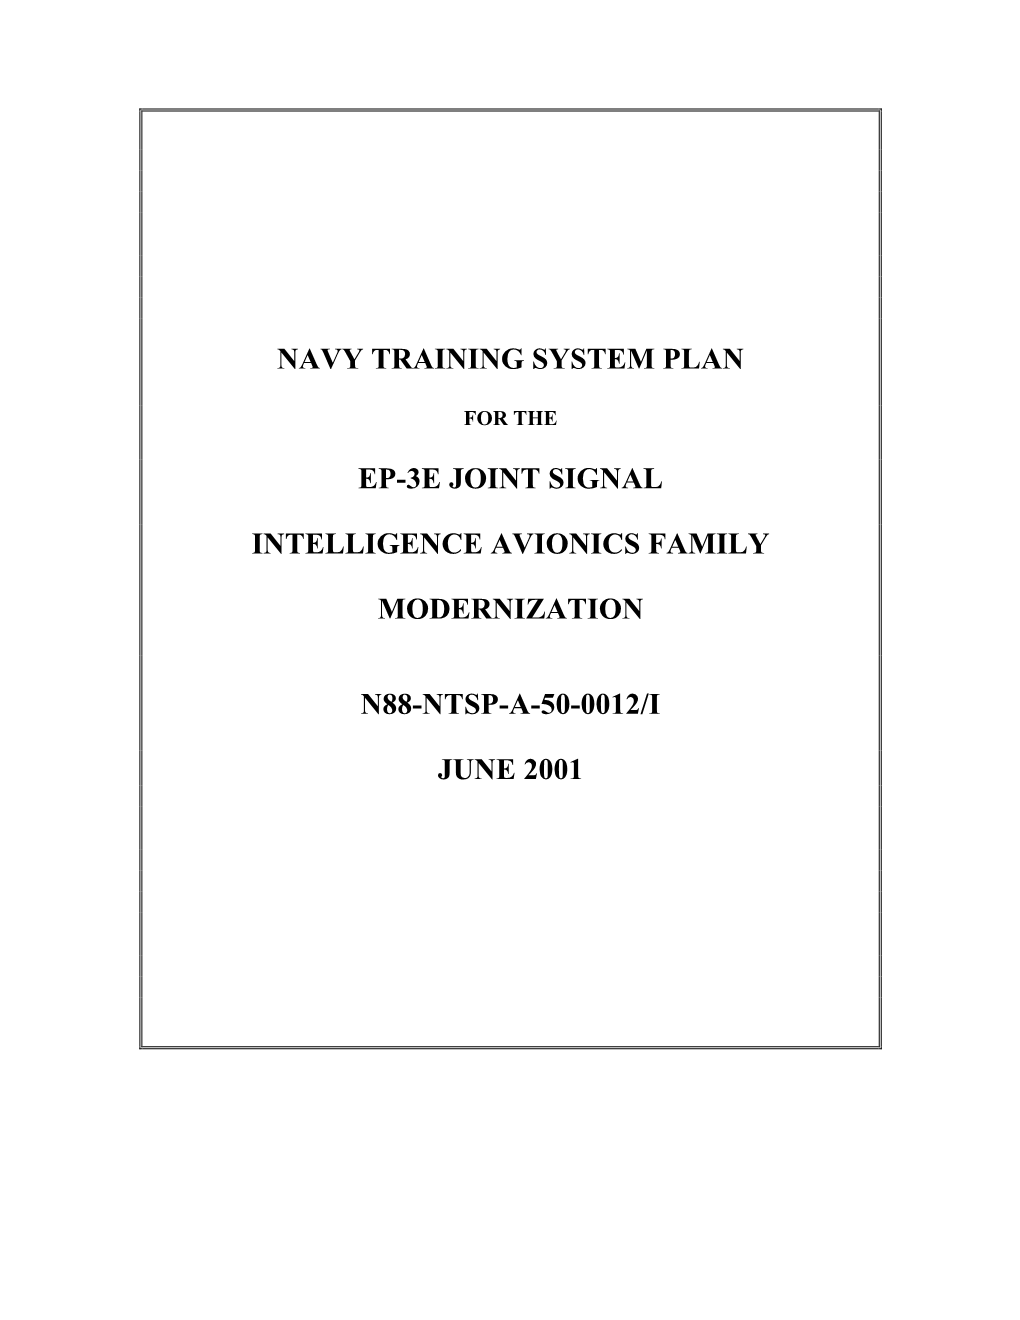 Navy Training System Plan for the EP-3E Joint Signal Intelligence